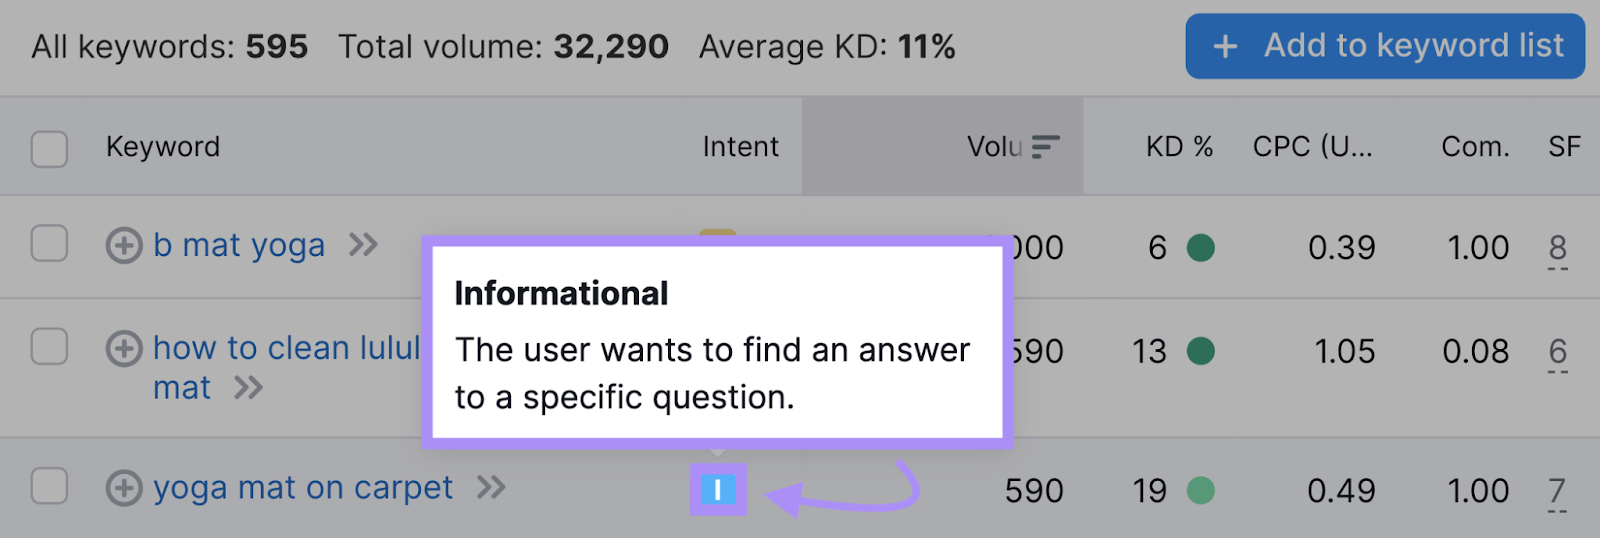 "Informational" intent box explains that "The user wants to find an answer to a specific question."